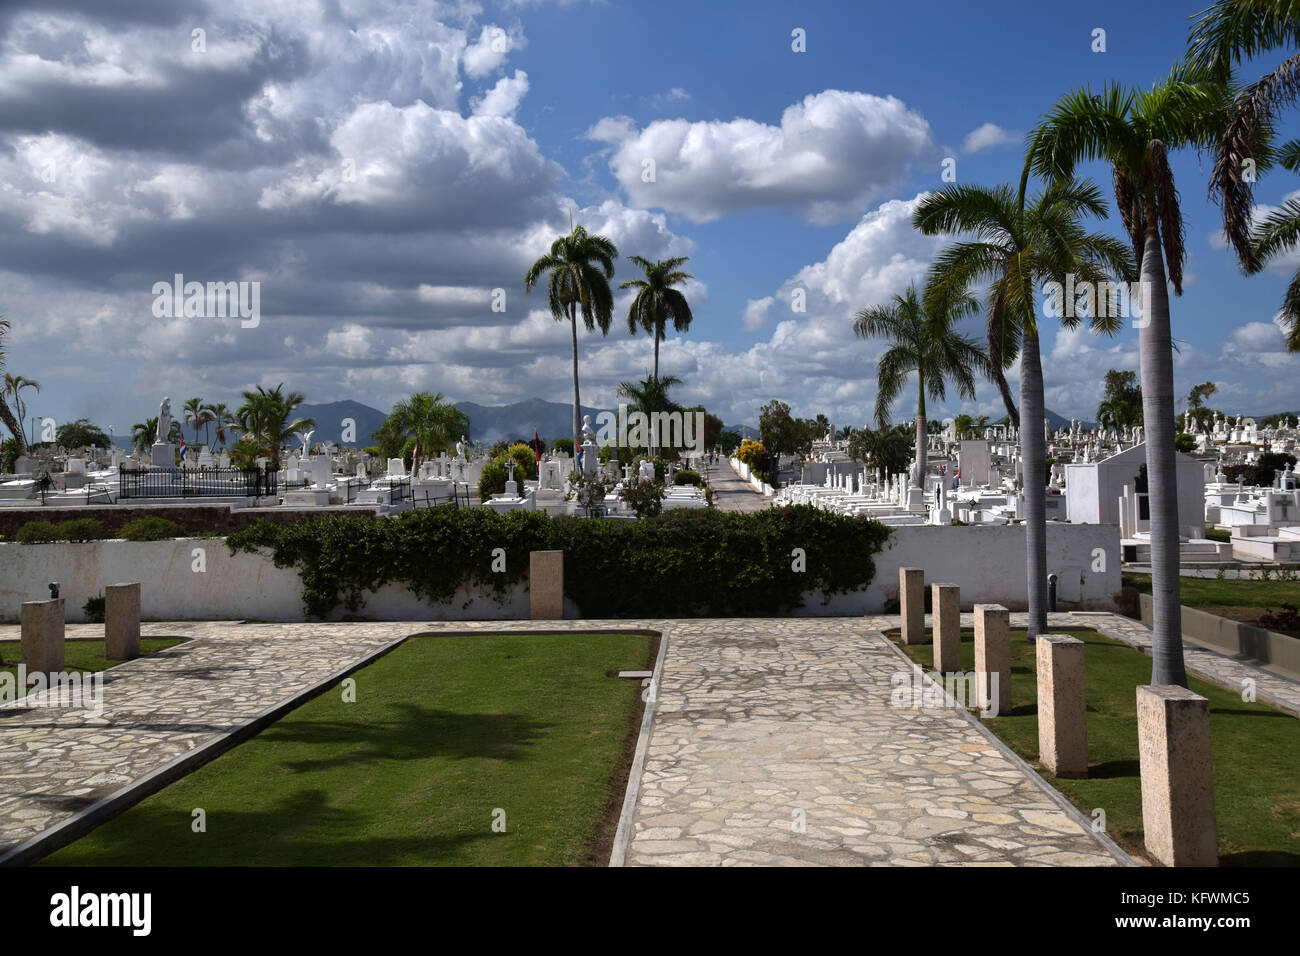 Ifigenia cemetery is the burial place for Jose Marti, Fidel Castro and many more. Iconic place in Santiago de Cuba. Stock Photo